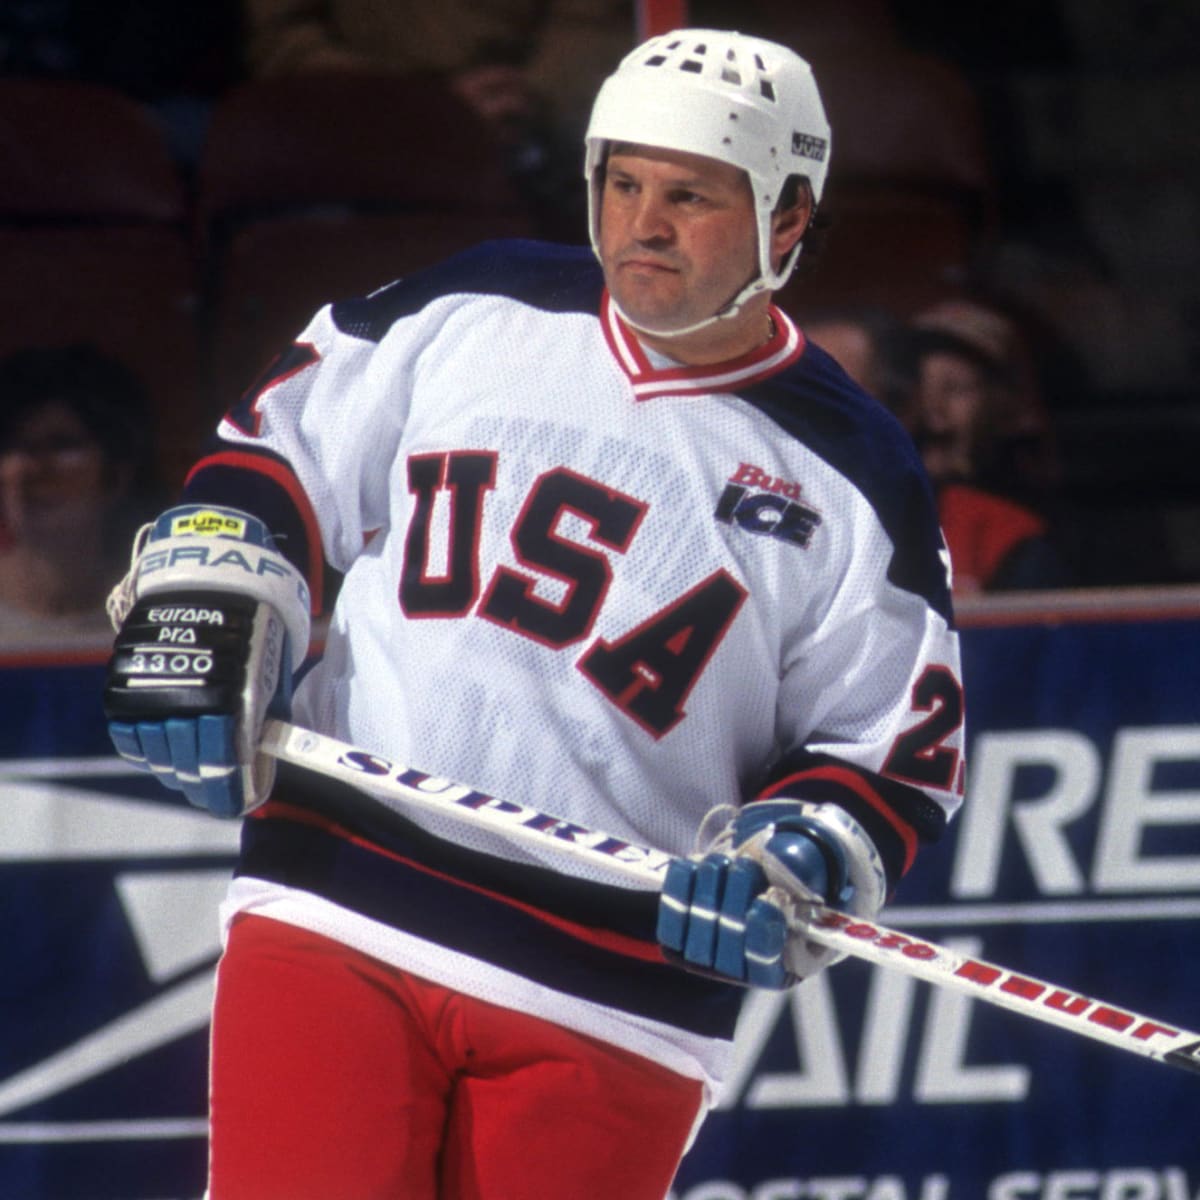 Mike Eruzione Celebrity NHL Olympian with Miracle on Ice Team